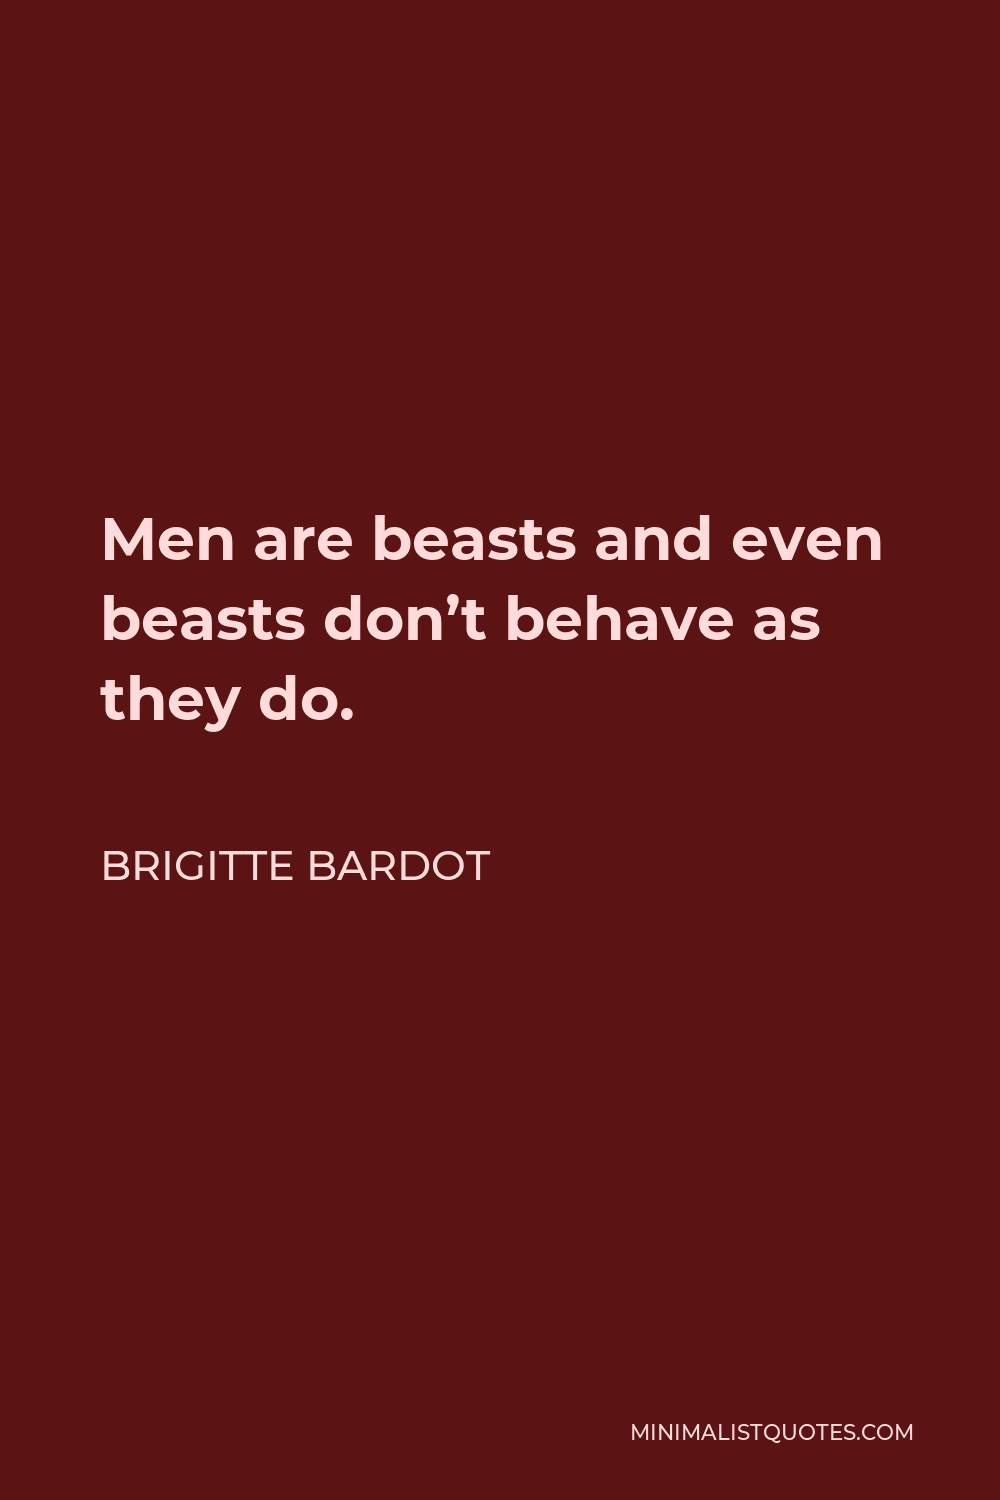 Brigitte Bardot Quote - Men are beasts and even beasts don’t behave as they do.